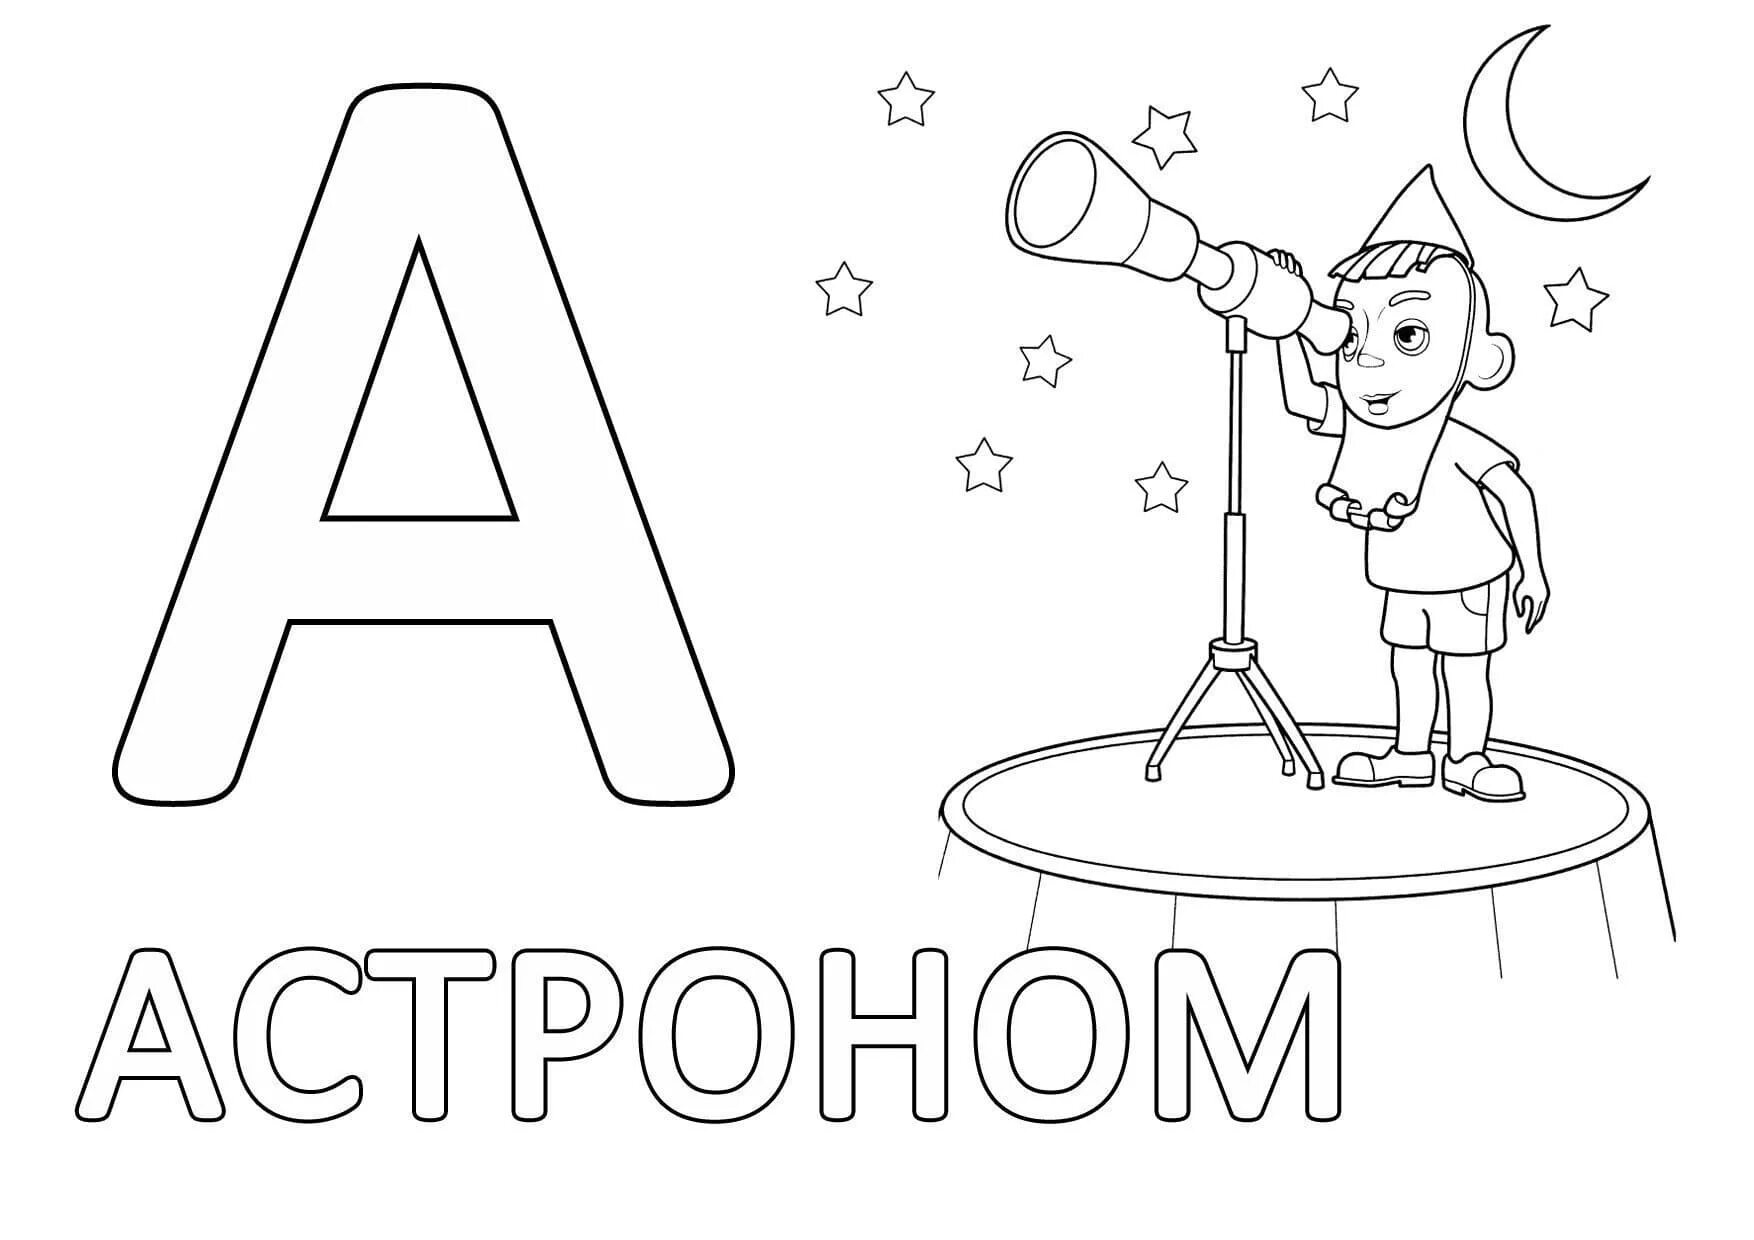 Colorful Laura Alphabet Coloring Page for Kids